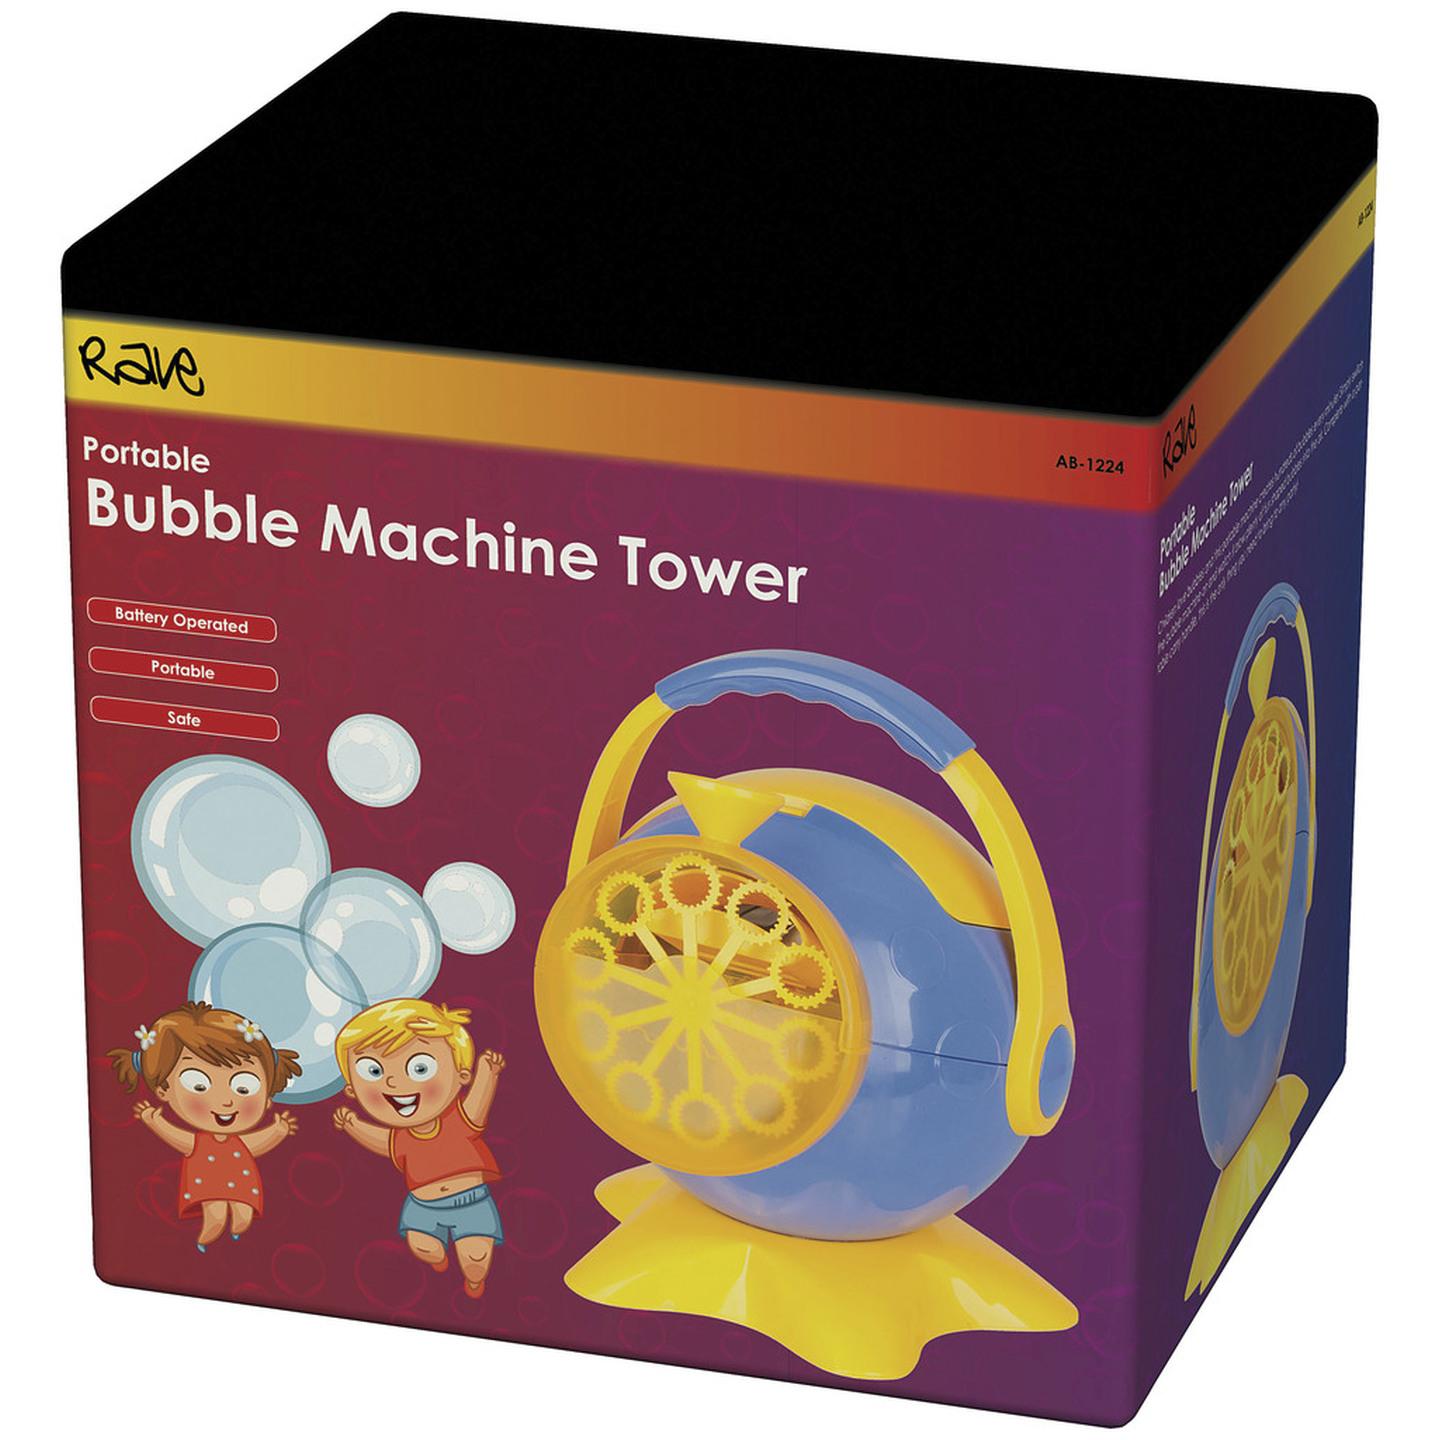 Battery Operated Portable Bubble Machine